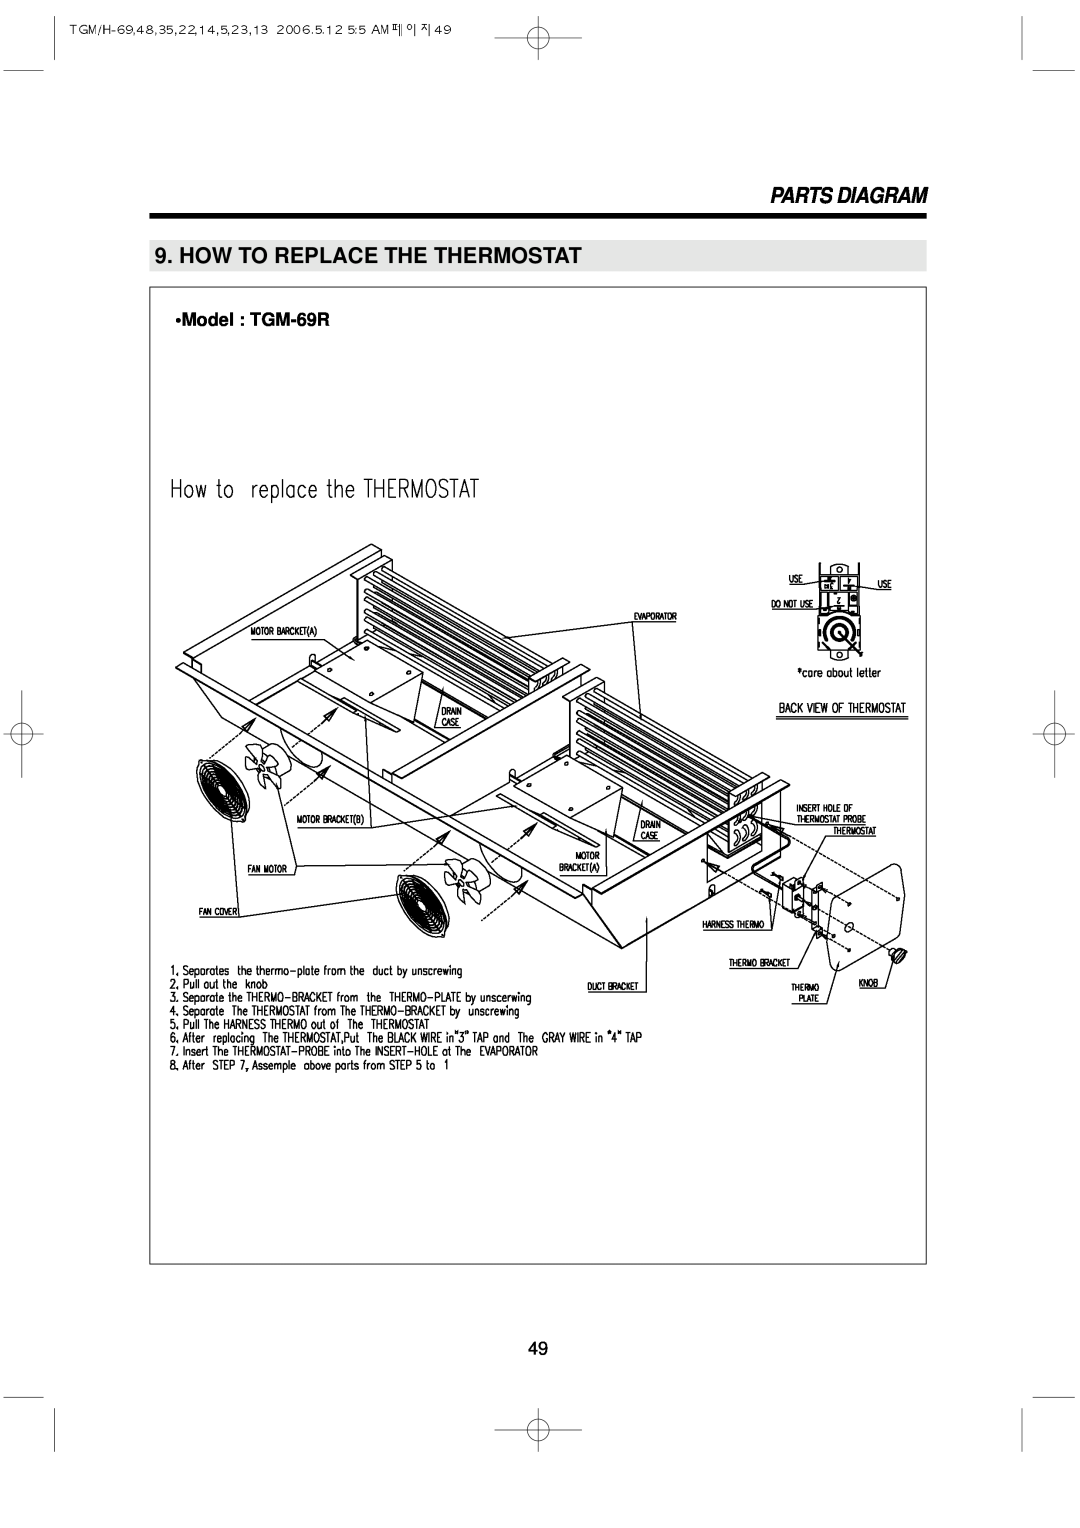 Turbo Air TGM-45R, TGM-5R, TGM-22R, TGM-48R, TGM-11RV, TGM-14R How To Replace The Thermostat, Model TGM-69R, Parts Diagram 